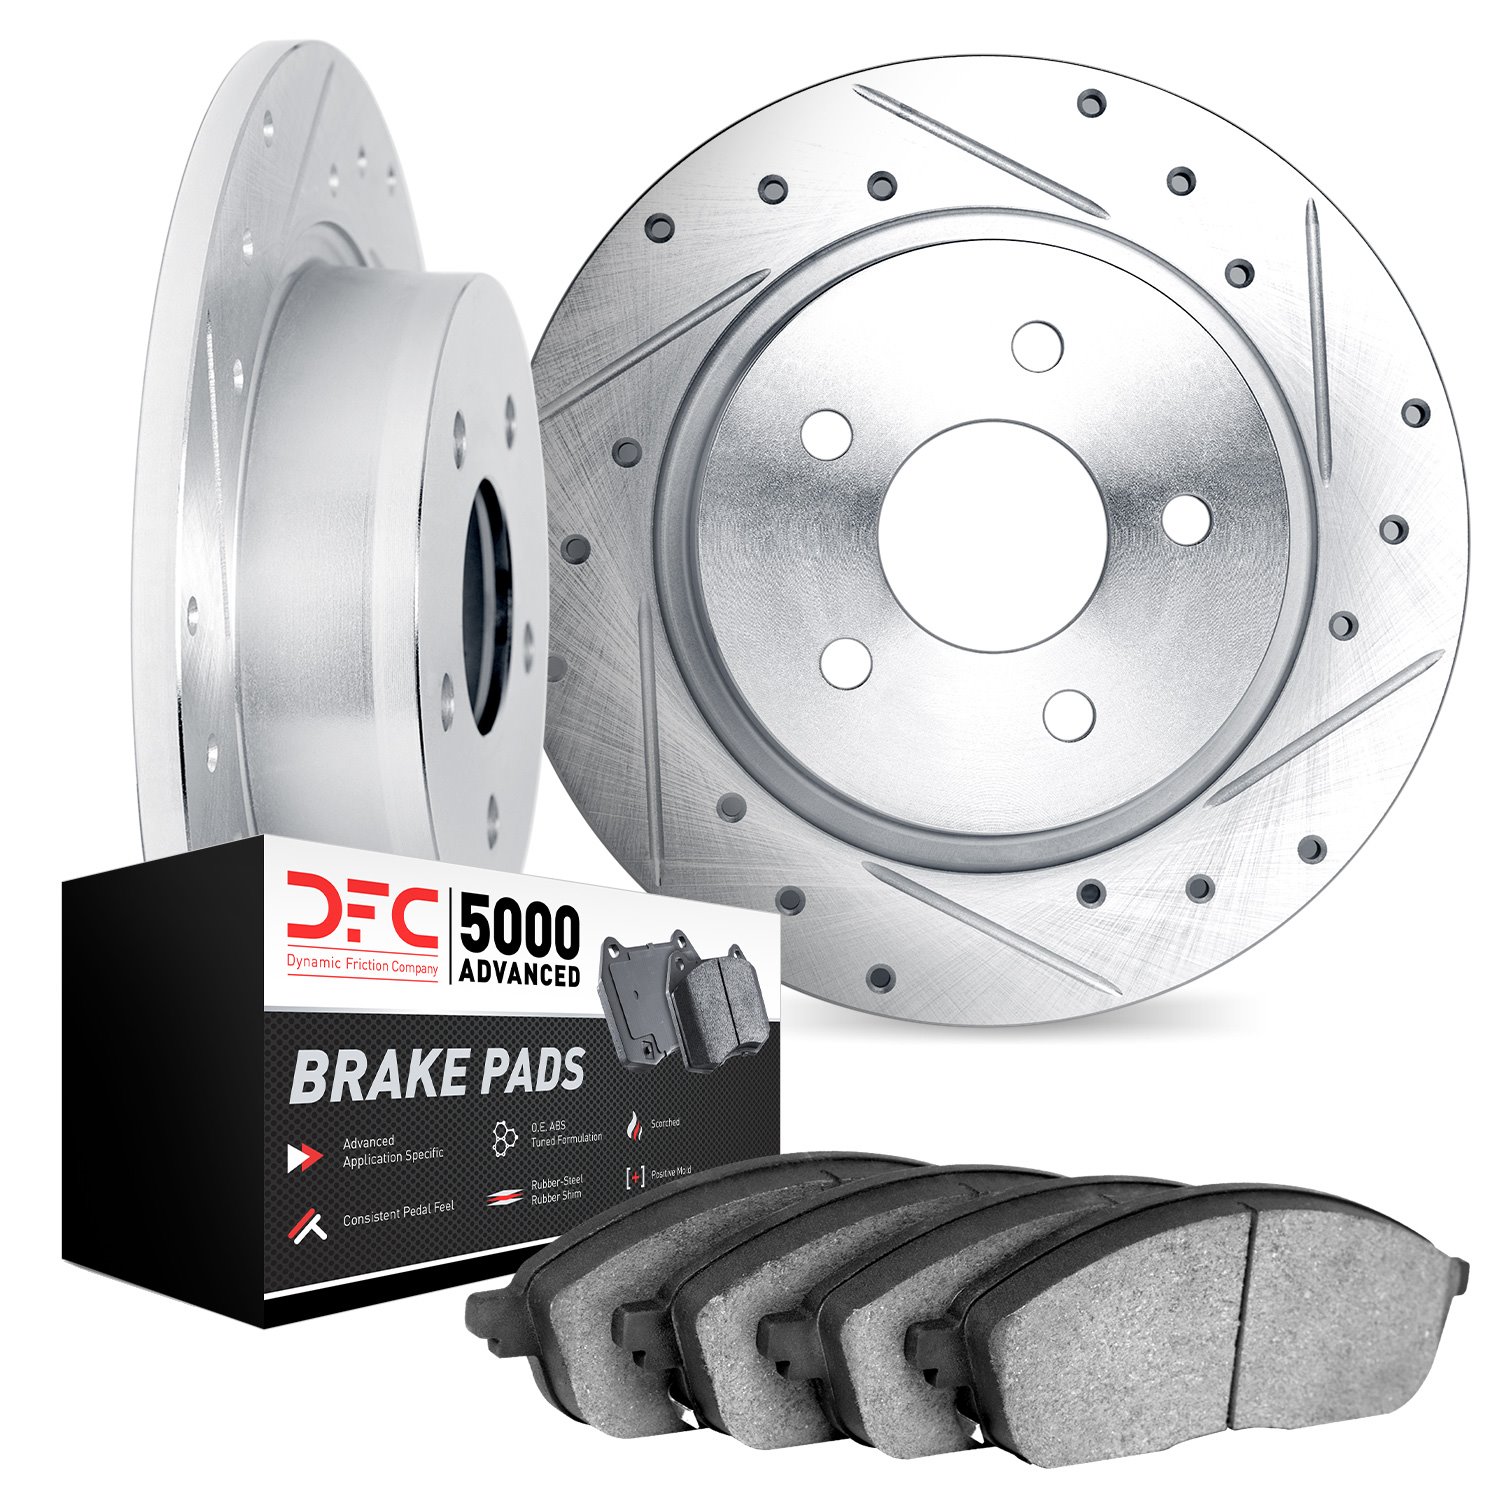 7502-80083 Drilled/Slotted Brake Rotors w/5000 Advanced Brake Pads Kit [Silver], Fits Select Ford/Lincoln/Mercury/Mazda, Positio